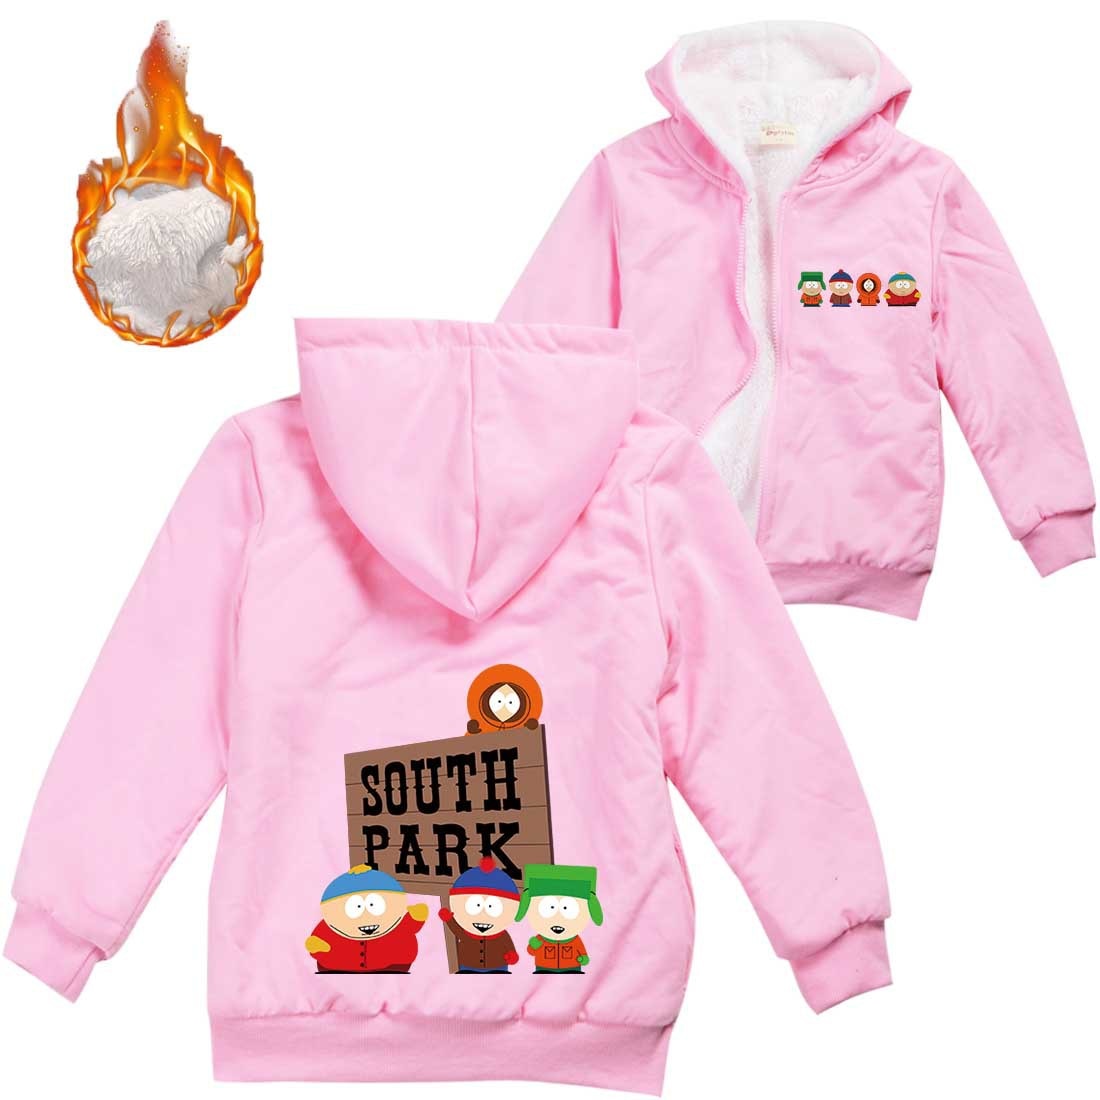 Anime S Southes Park Clothes Kids Warm Thick Velvet Hoody Jacket Teenager Boys Clothes Baby Girls 3 - South Park Plush